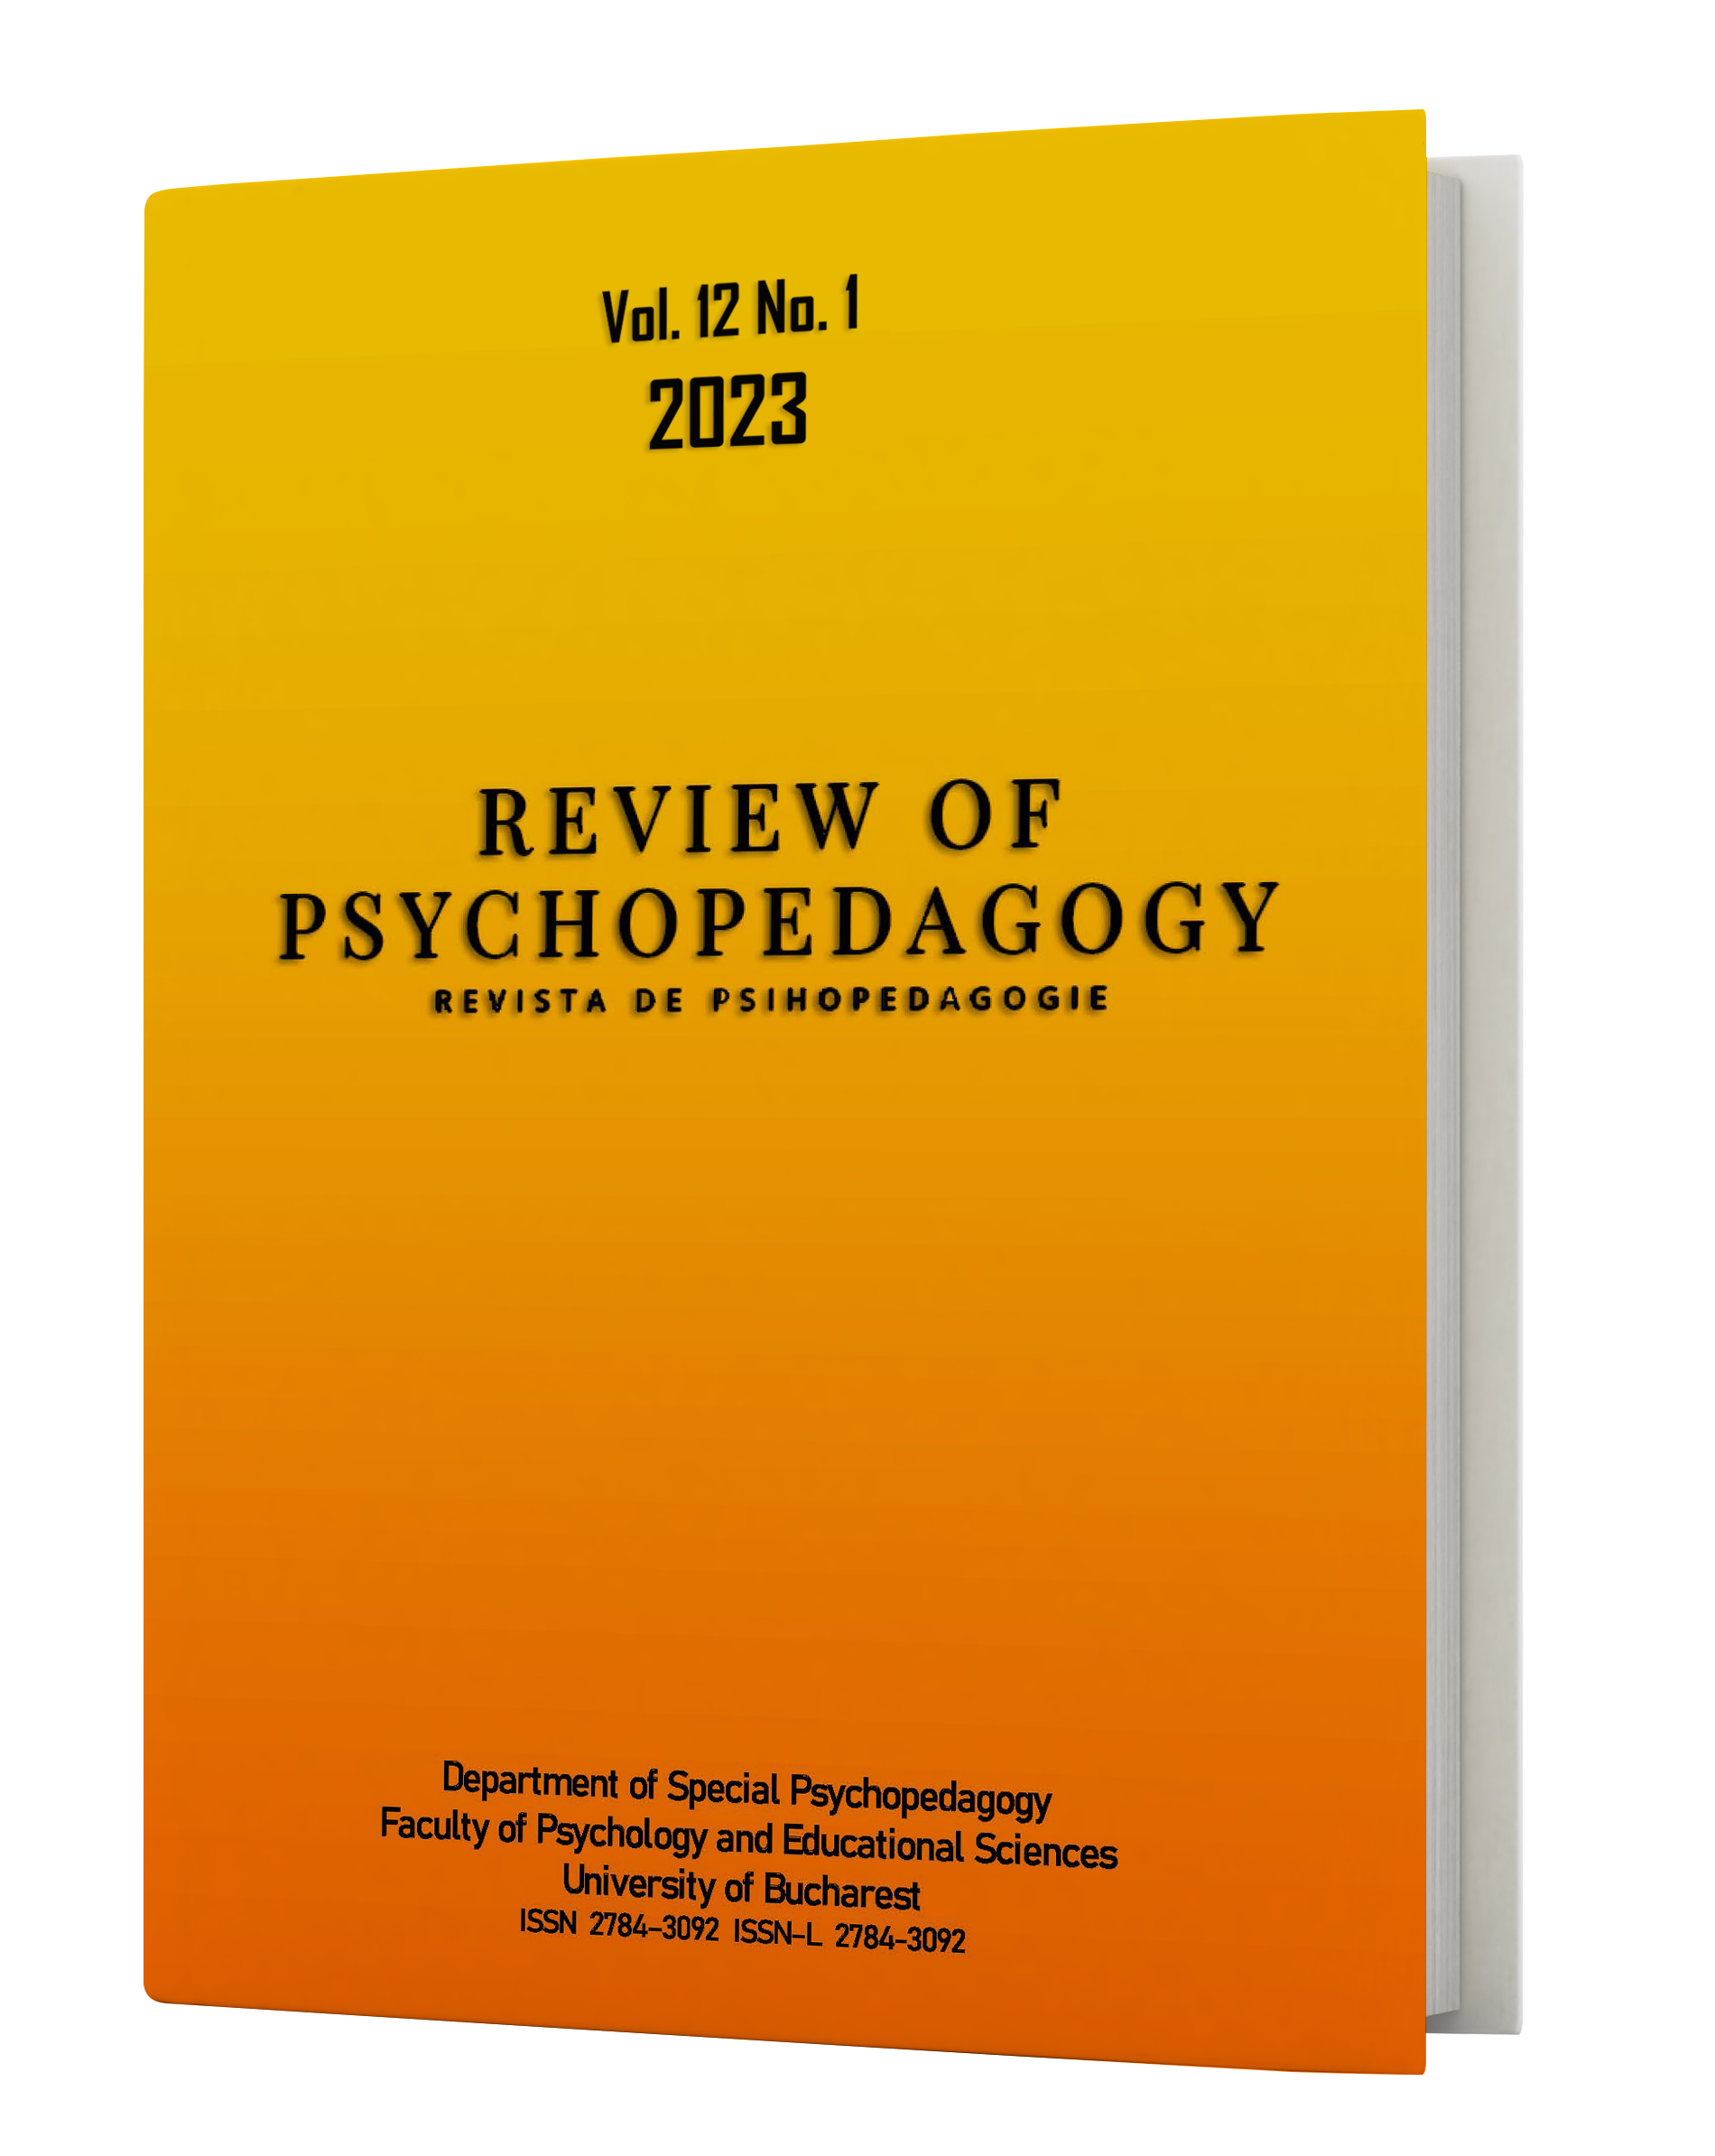 Work values and job satisfaction of practitioners working with persons with disabilities: the role of psychological flexibility